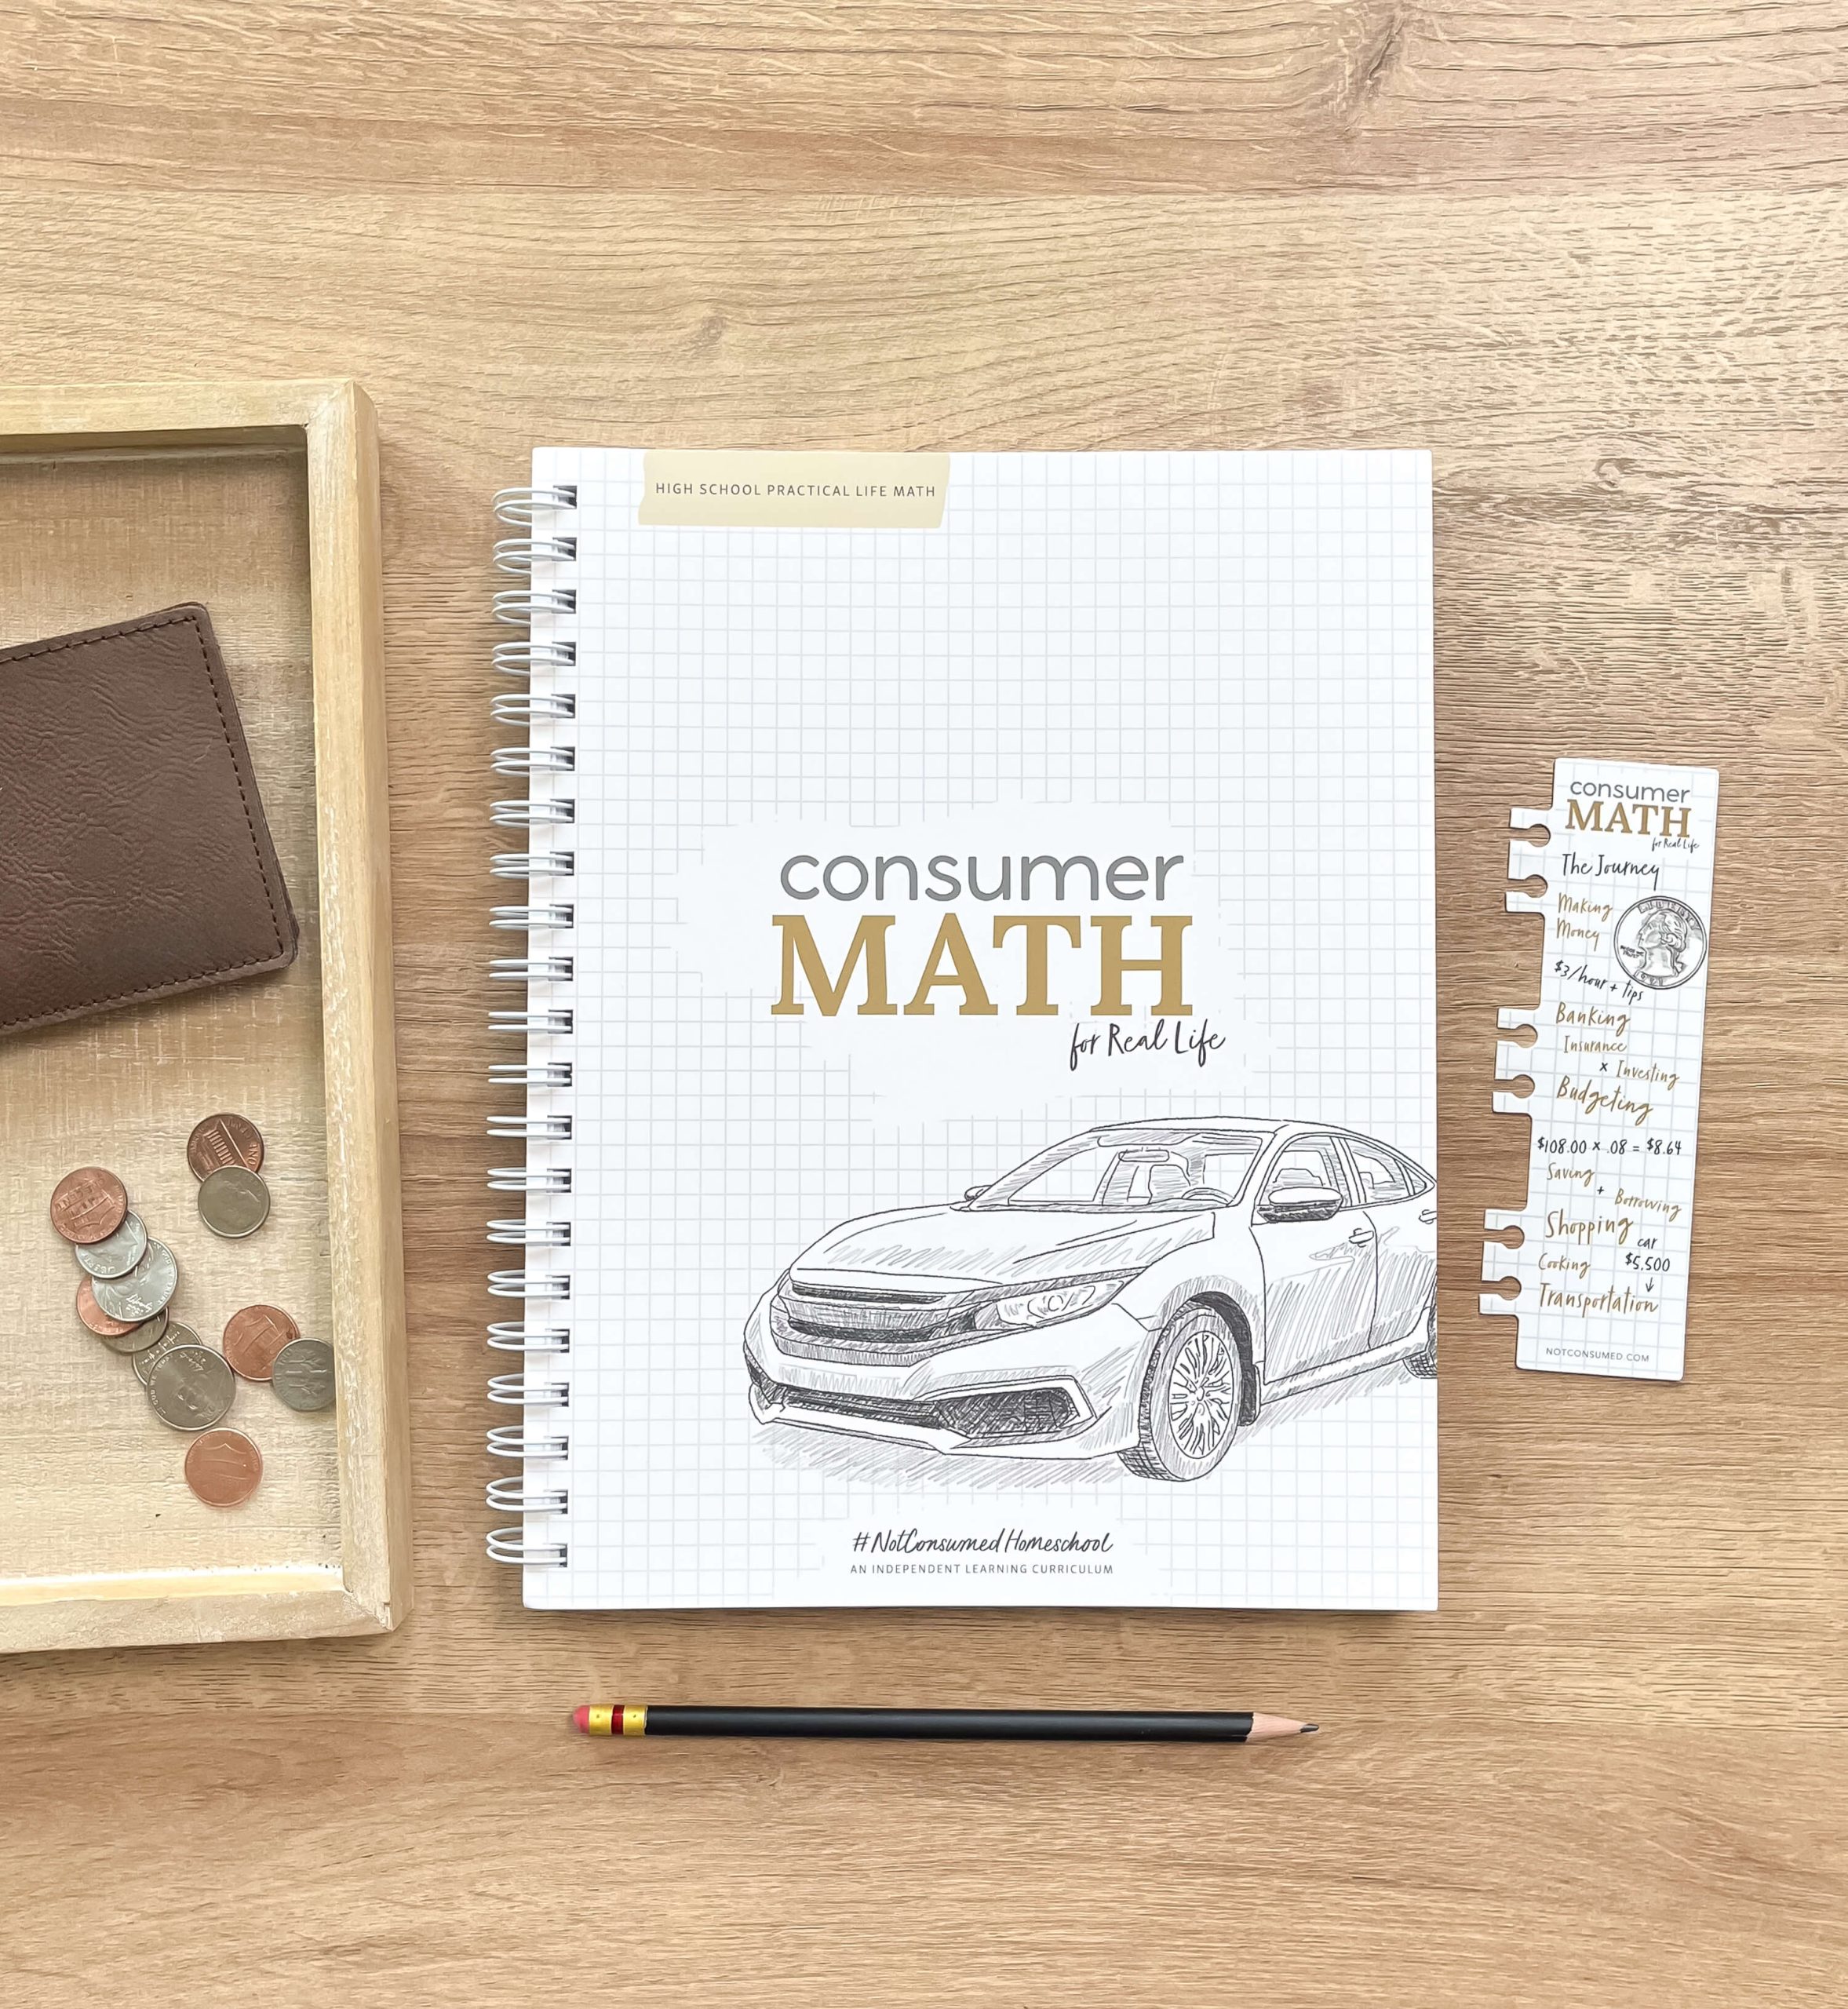 4 Ways That Consumer Math Prepares Your High Schoolers for Real Life